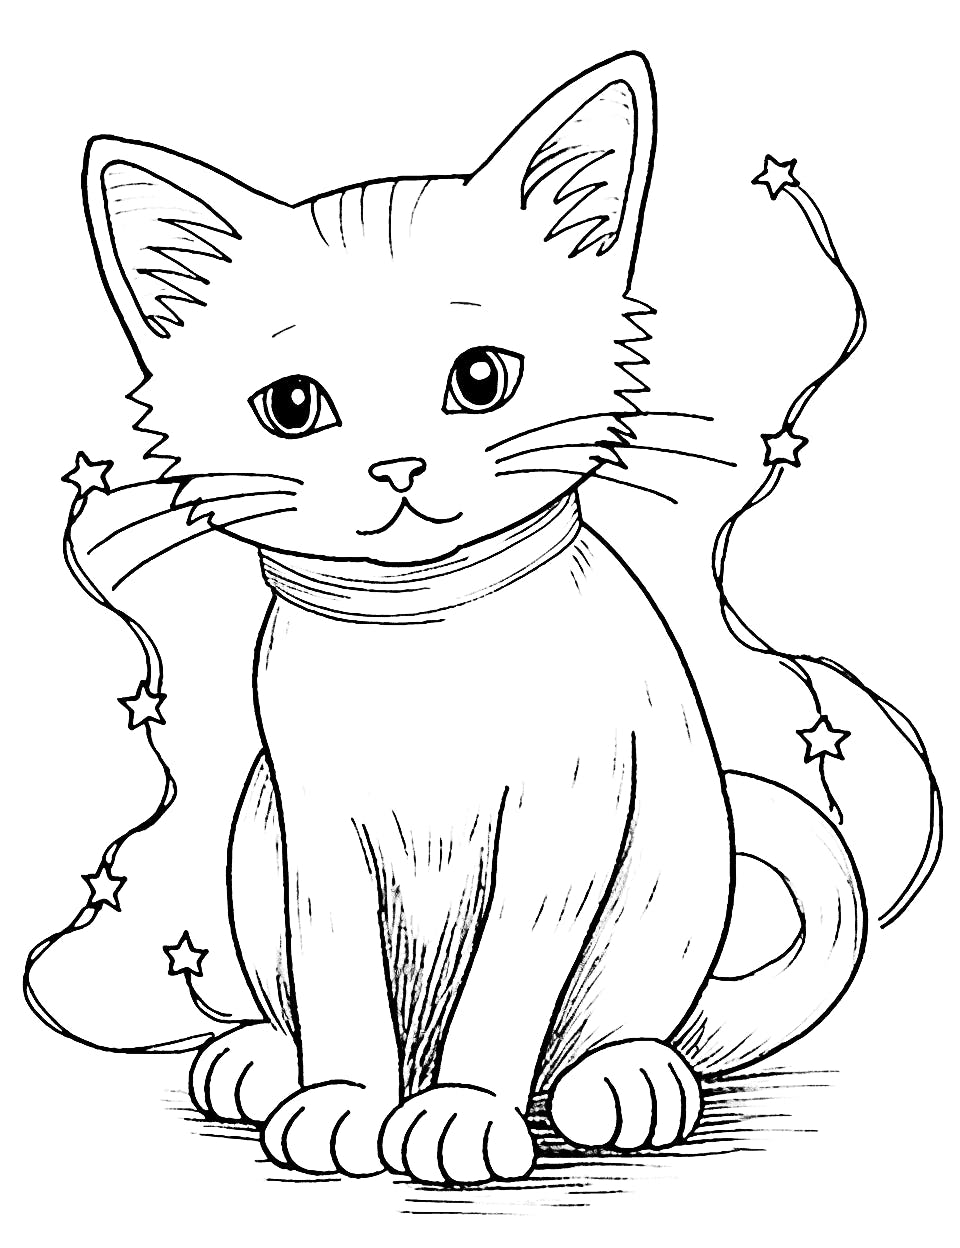 Explore Adorable Kittens in Cat Coloring Pages